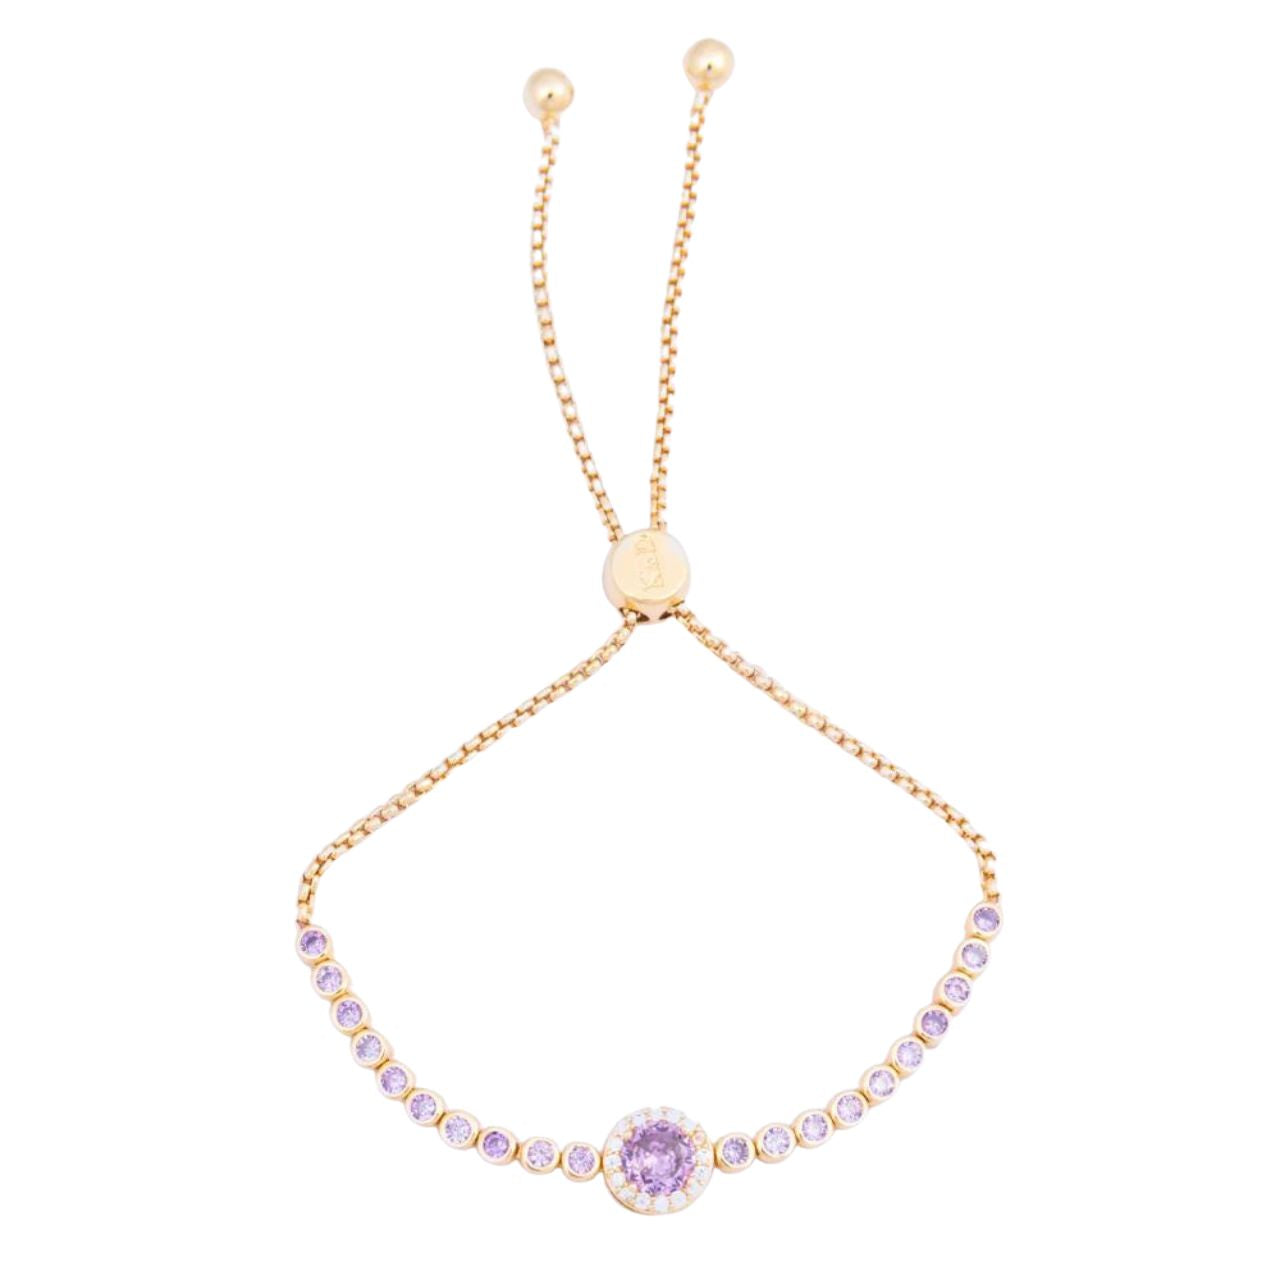 Classic Amethyst Bracelet by Knight & Day  This sleek and stylish classic Amethyst Bracelet by Knight & Day adds a fashionable yet timeless touch to your look. Crafted from Amethysts and finely plated Gold, this timeless bracelet will add a touch of luxury to your everyday wardrobe.